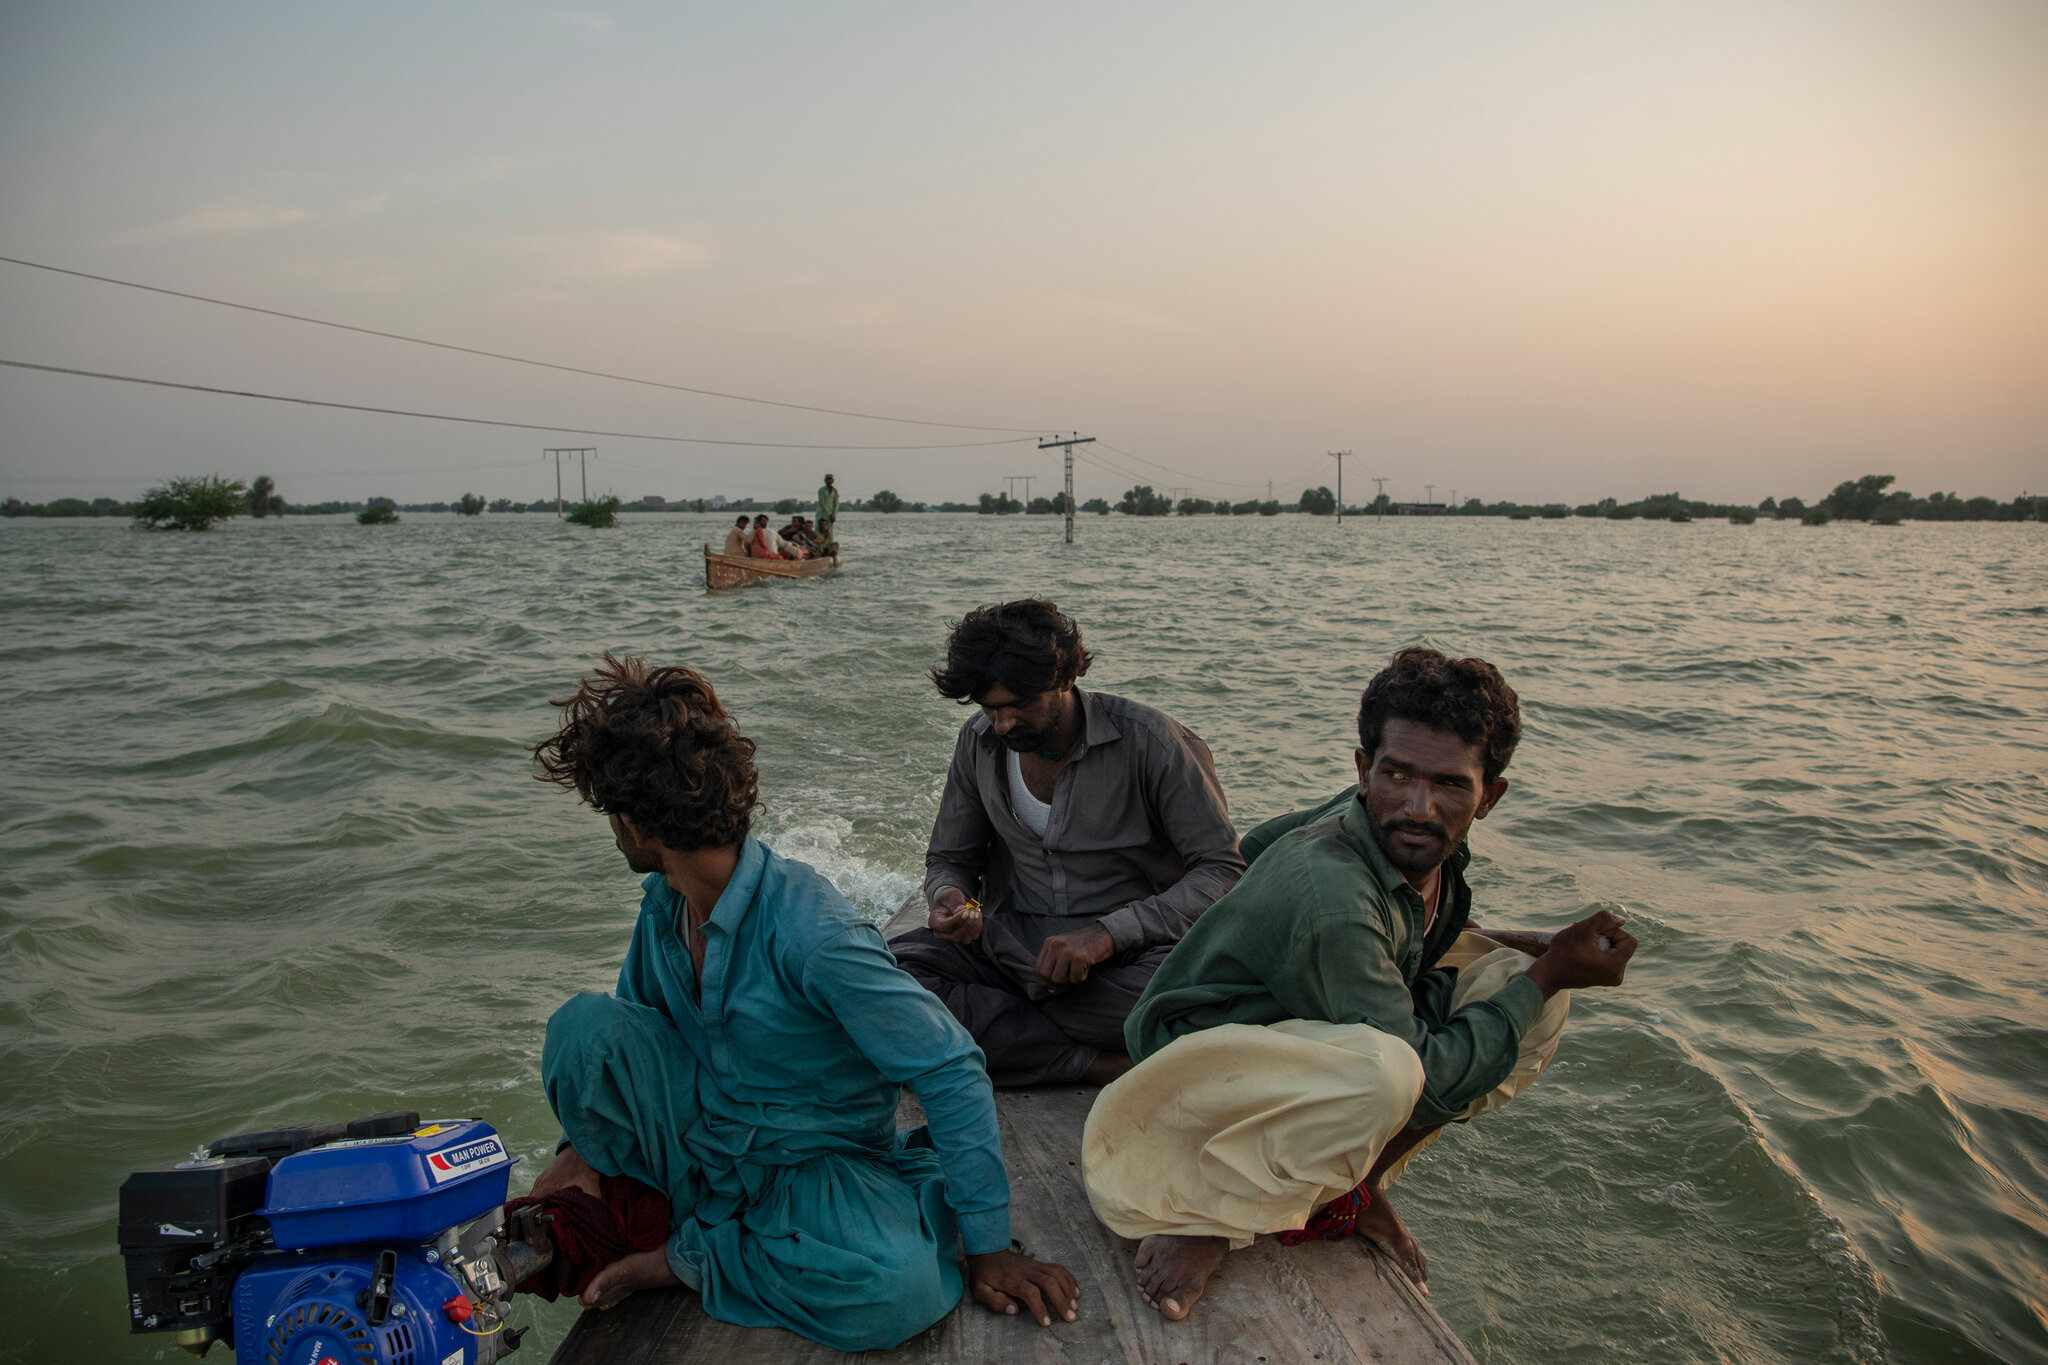 Boat operators, who have come from miles around to work as ferrymen in submerged areas, use power lines as navigation landmarks in Dadu, Pakistan, on Tuesday, 13 September 2022. They have become a lifeline for residents who are trying to save the livestock and belongings that were not washed away by floodwaters. Photo: Kiana Hayeri / The New York Times